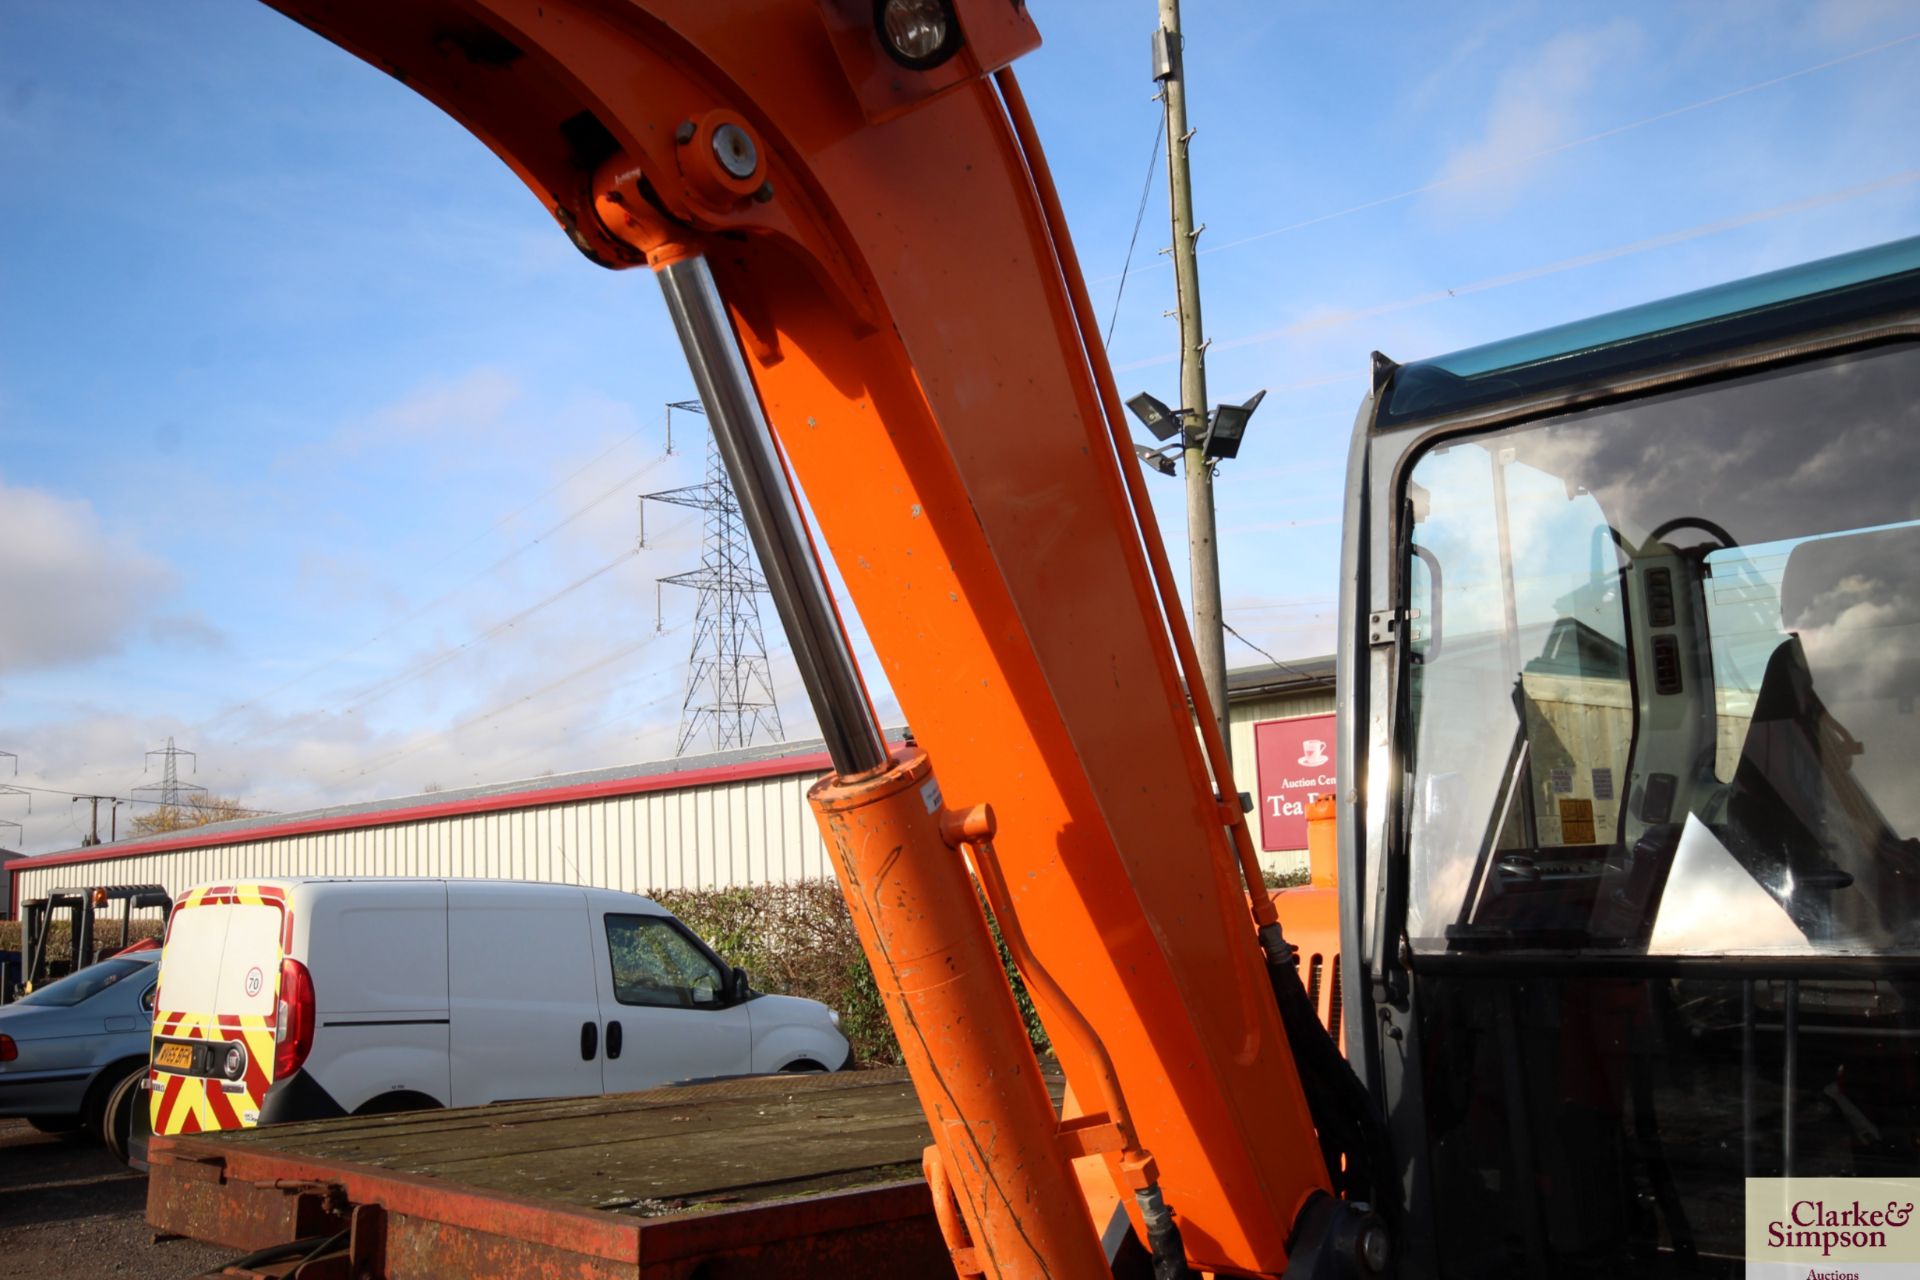 Doosan DX55E 5.5T excavator. 2011. 5,045 hours. Serial number 50461. With new rubber tracks 50 hours - Image 13 of 68